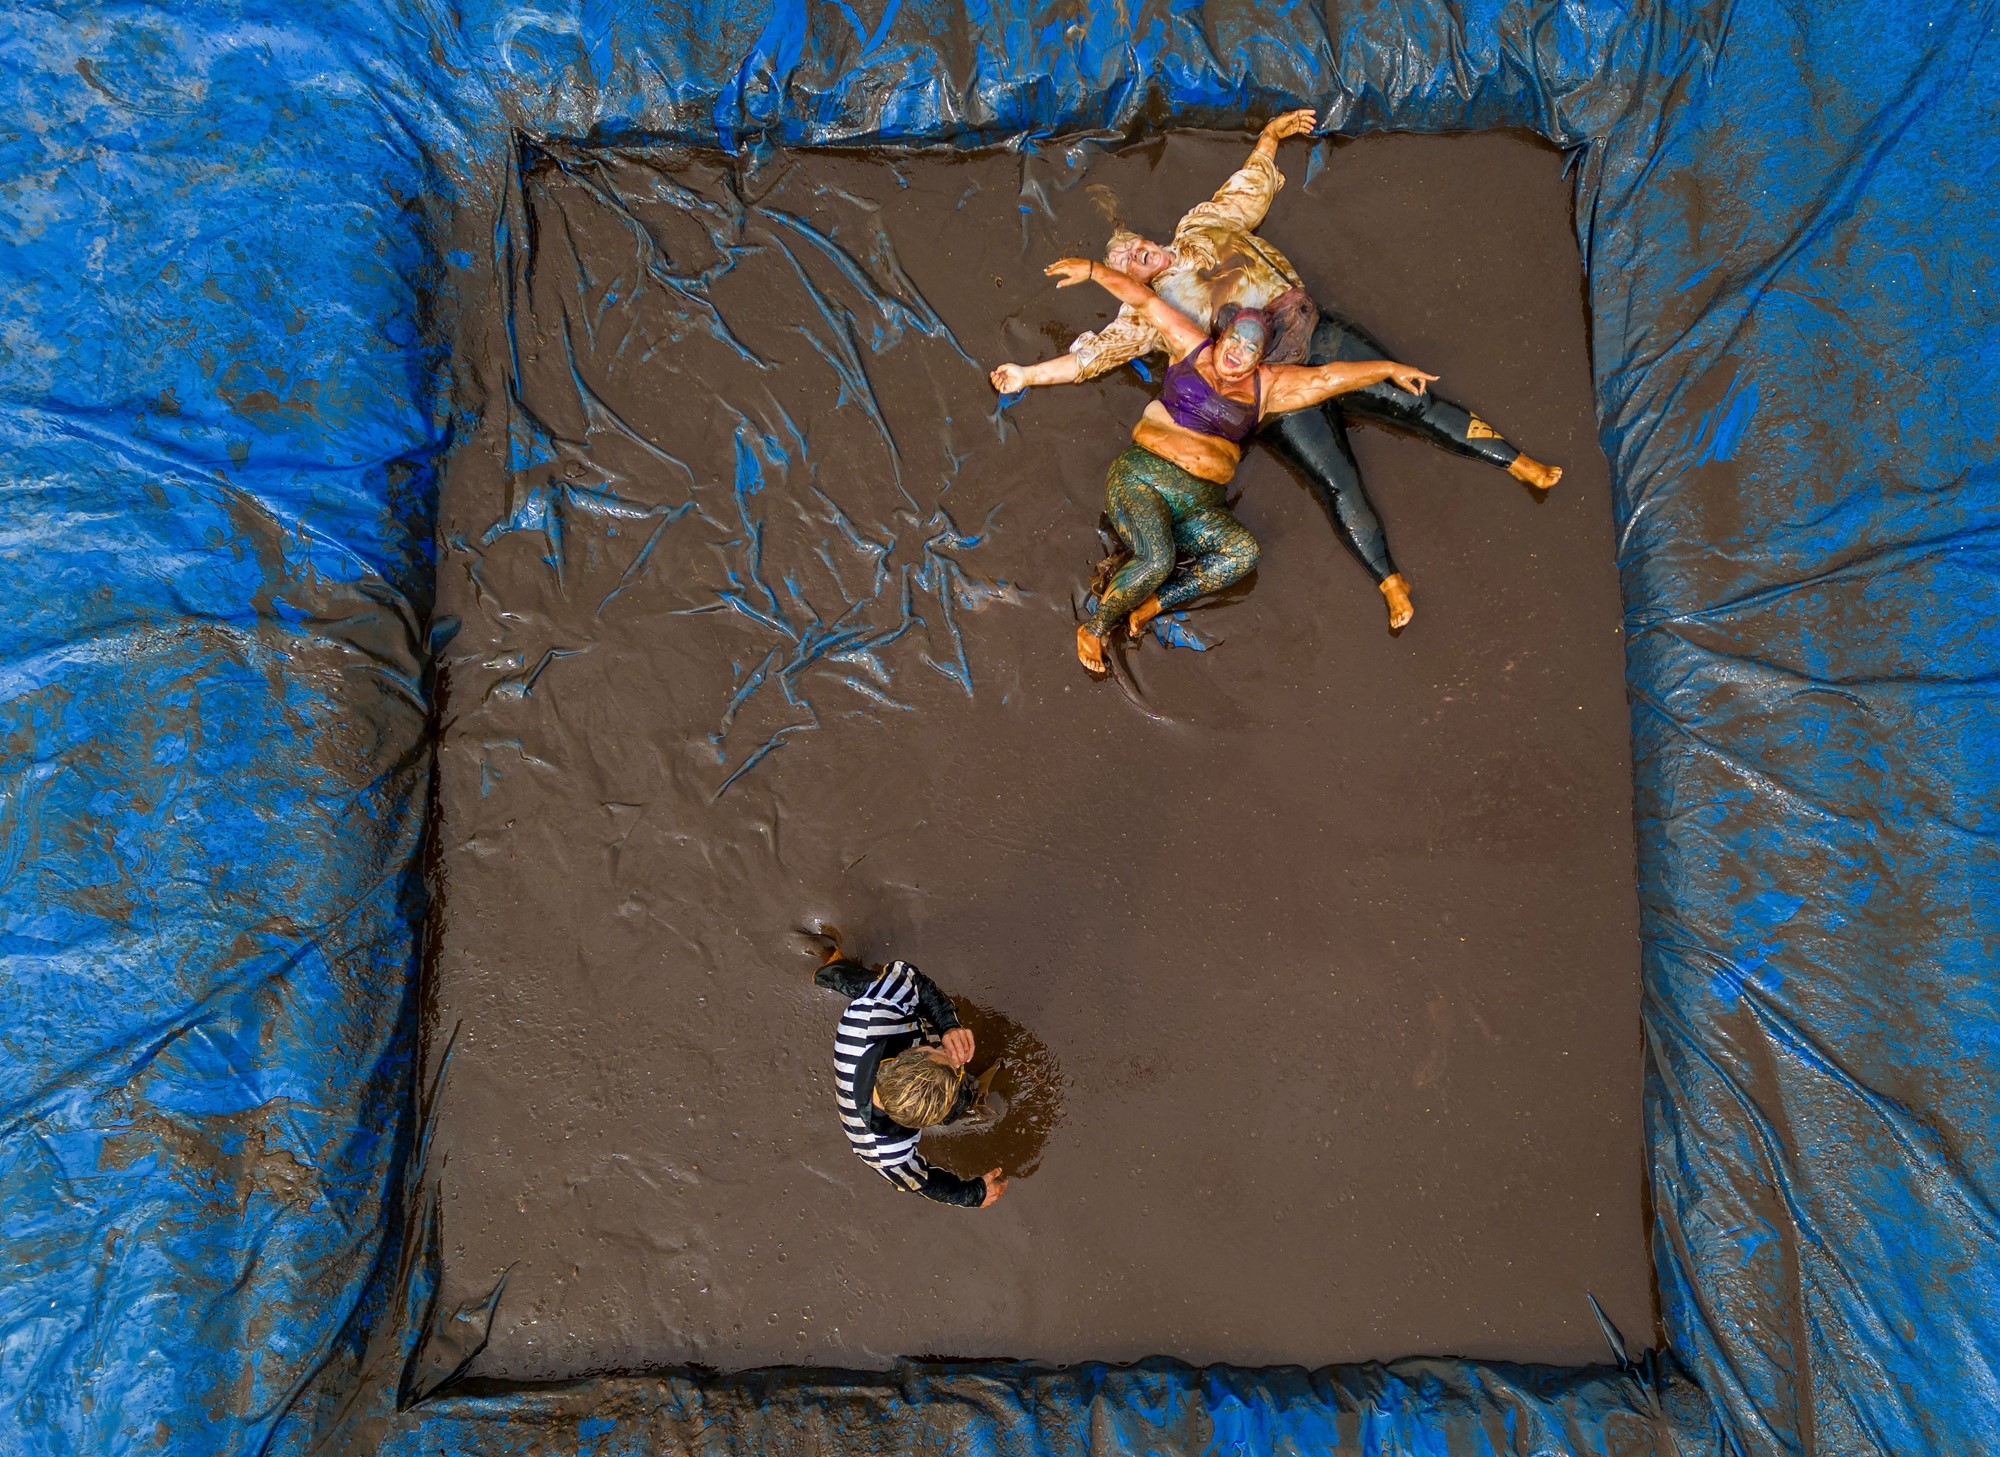 Aerial shot of two people wrestling in a pool  of gravy